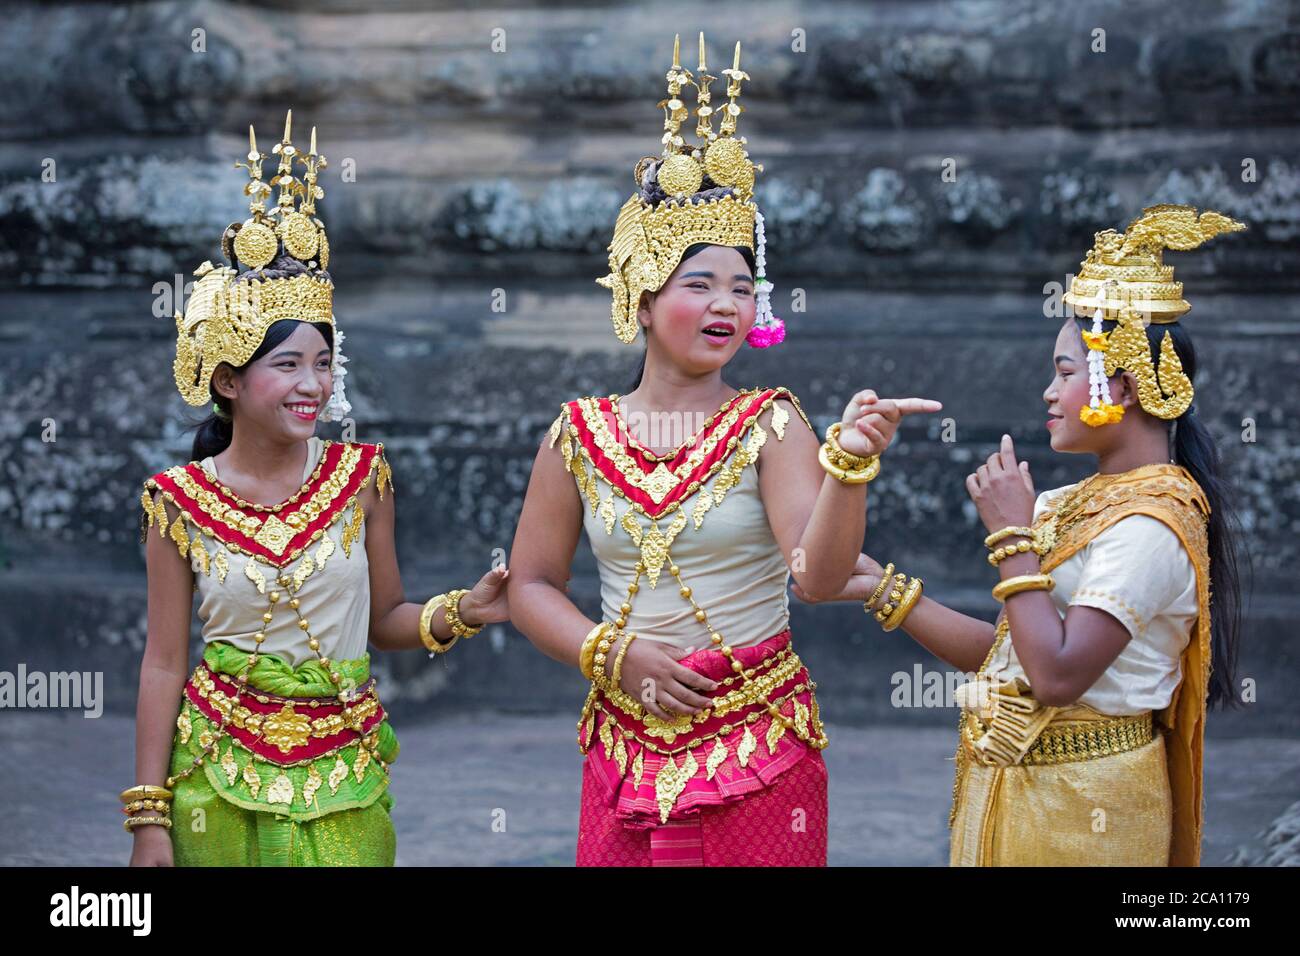 Young Cambodian dancers dressed as Apsaras in the 12th century temple complex Angkor Wat, dedicated to the god Vishnu, Siem Reap, Cambodia, Asia Stock Photo